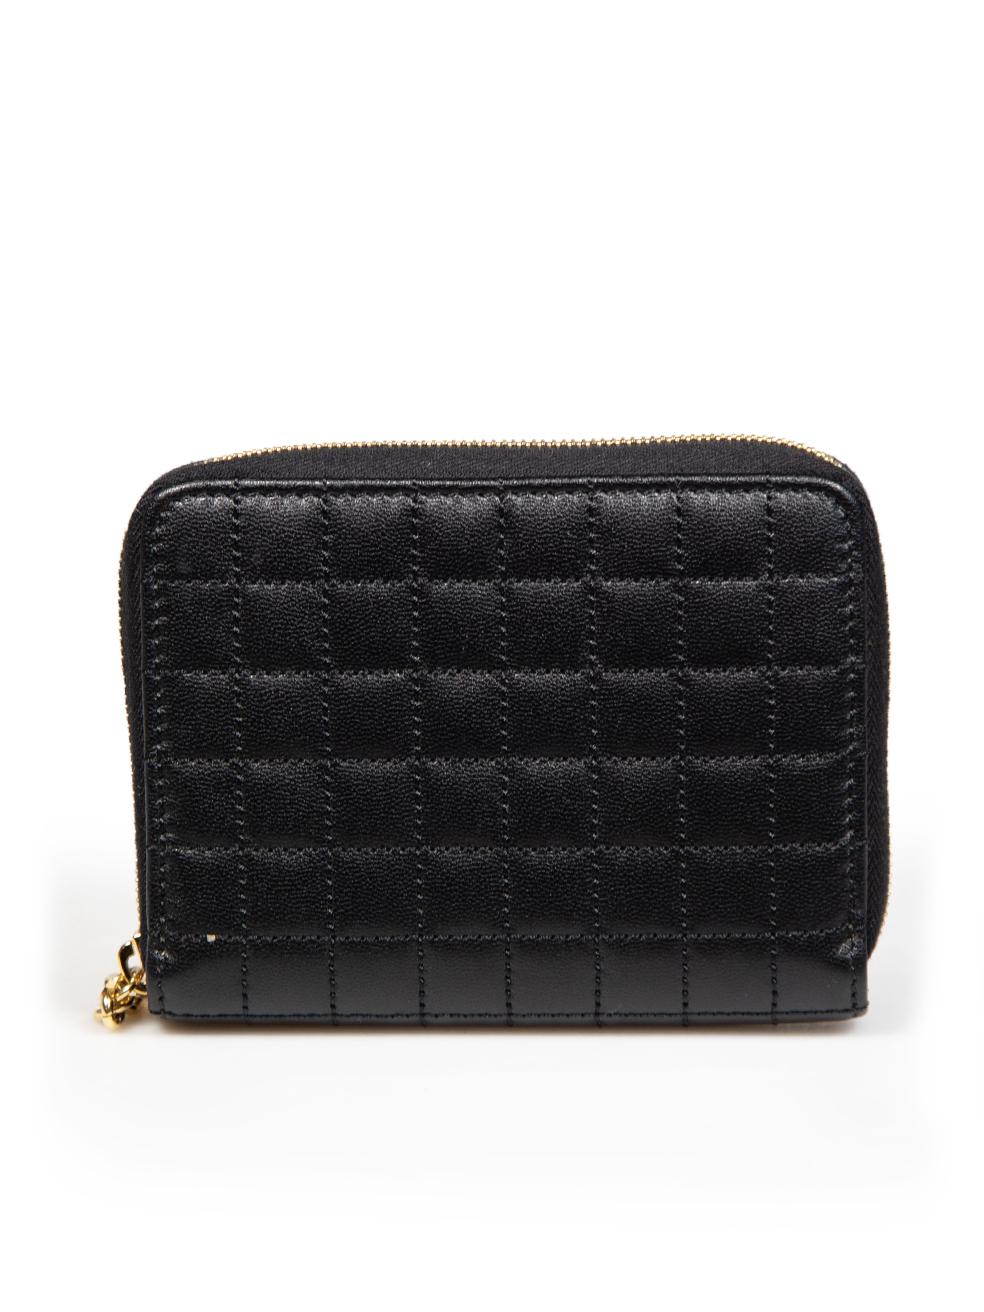 Céline Black Leather C Charm Quilted Wallet In Excellent Condition In London, GB